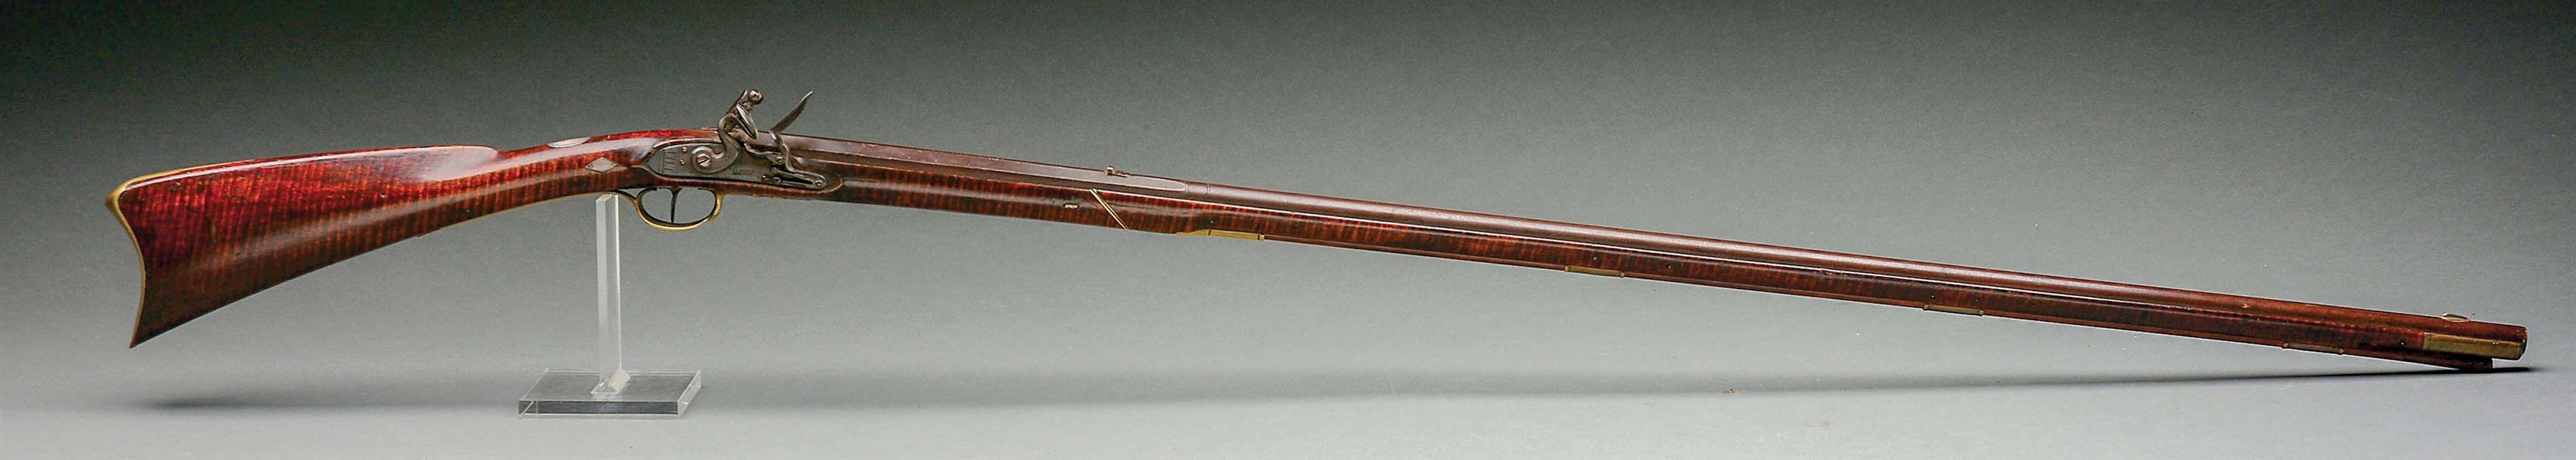 (A) FINE FLINTLOCK TAKEDOWN SMOOTH RIFLE, SIGNED H. ALBRIGHT. 